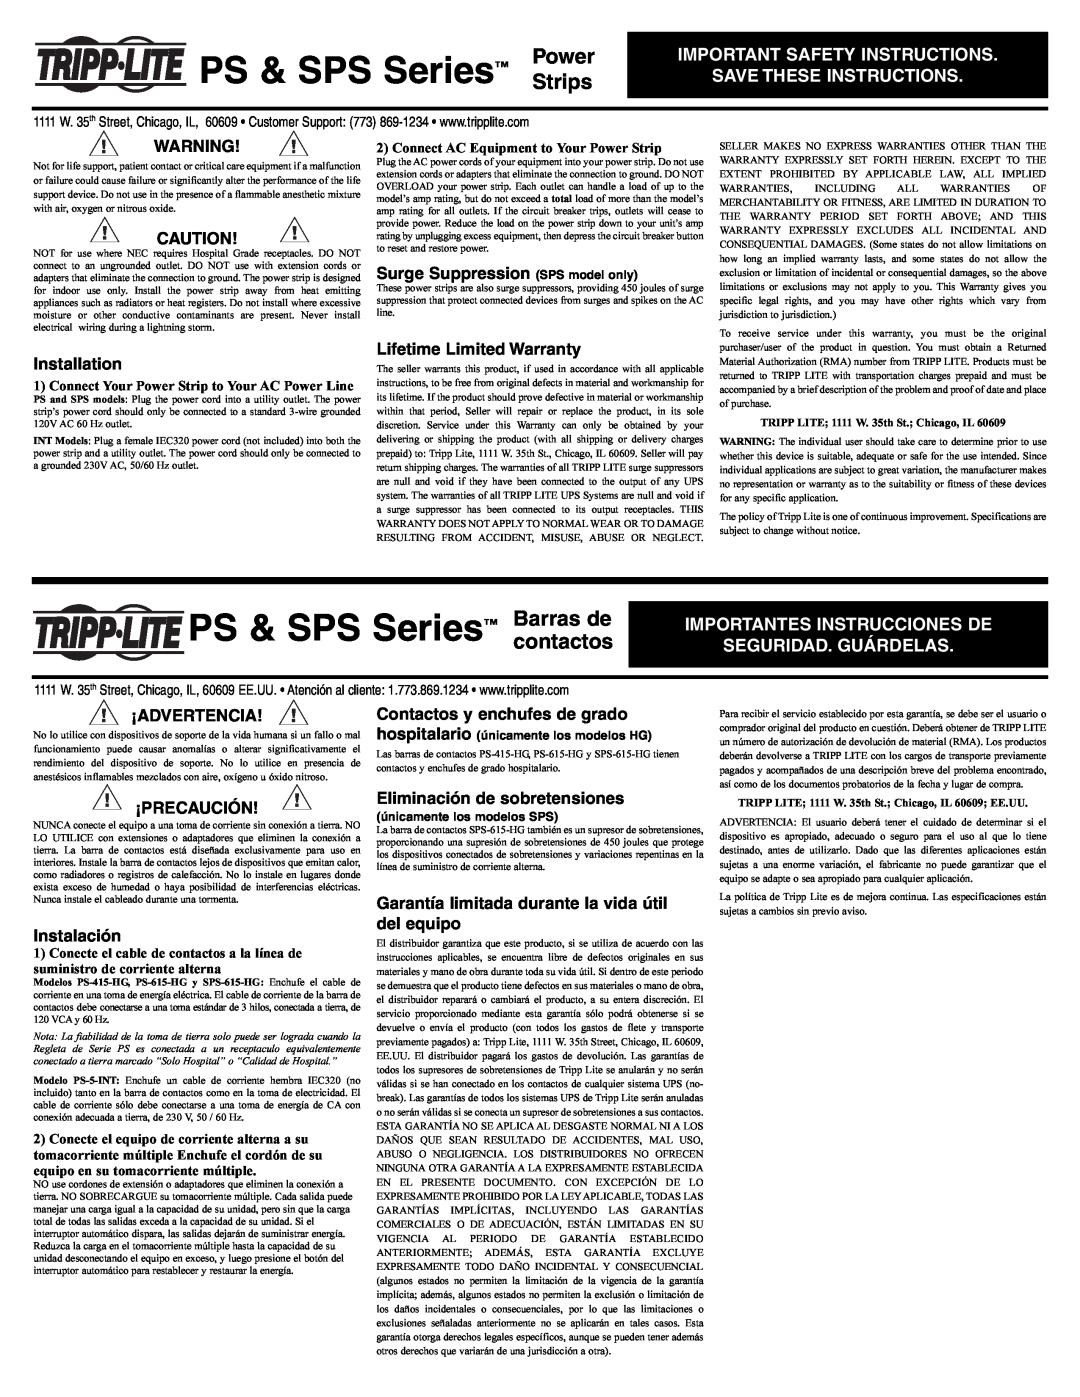 Tripp Lite 200401086 important safety instructions Important Safety Instructions Save These Instructions, Installation 